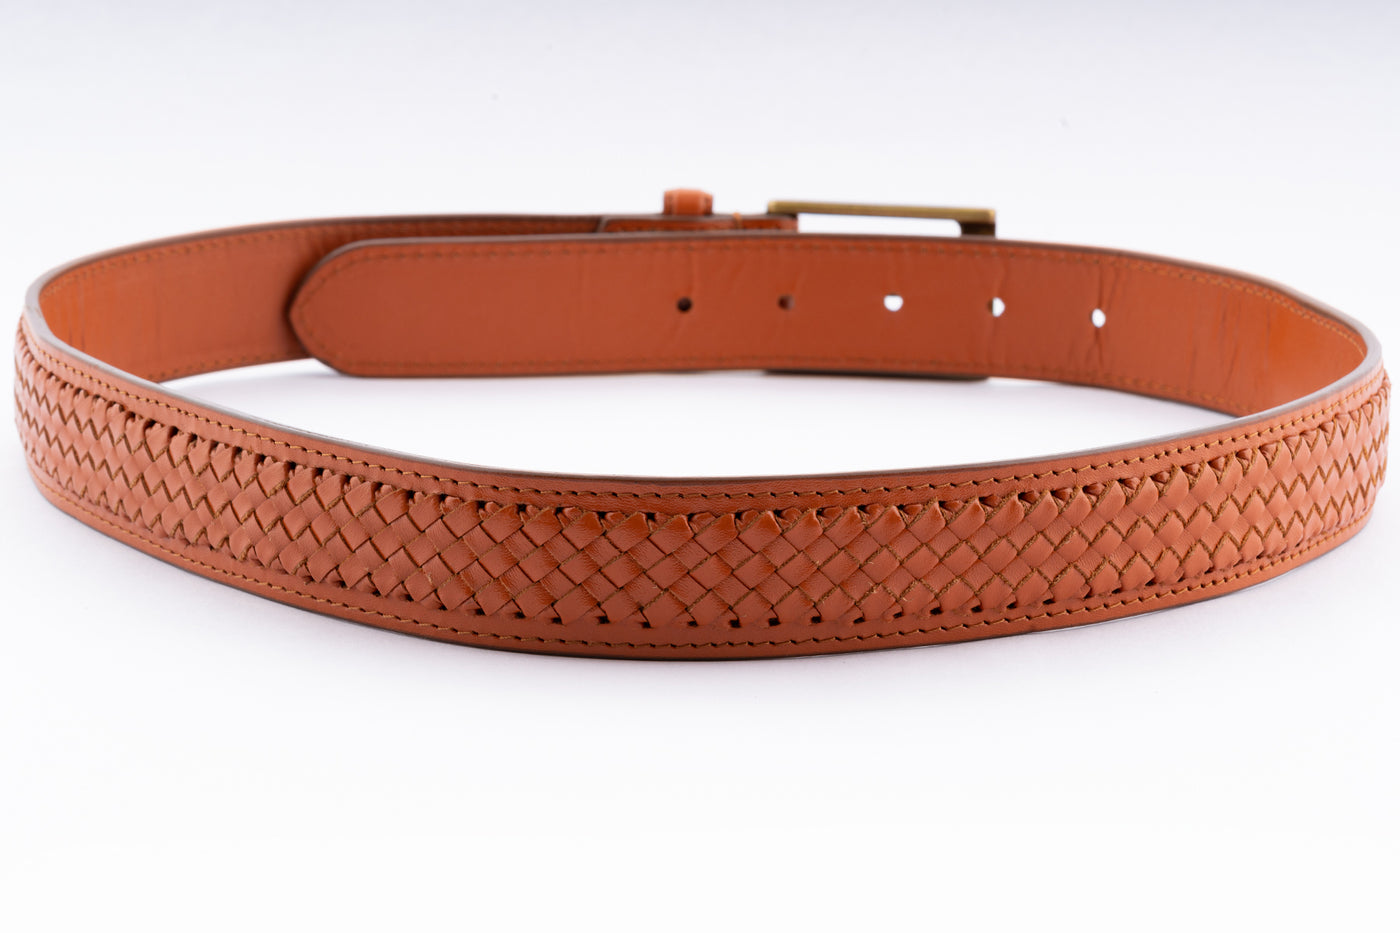 Classic Brown Leather Belt